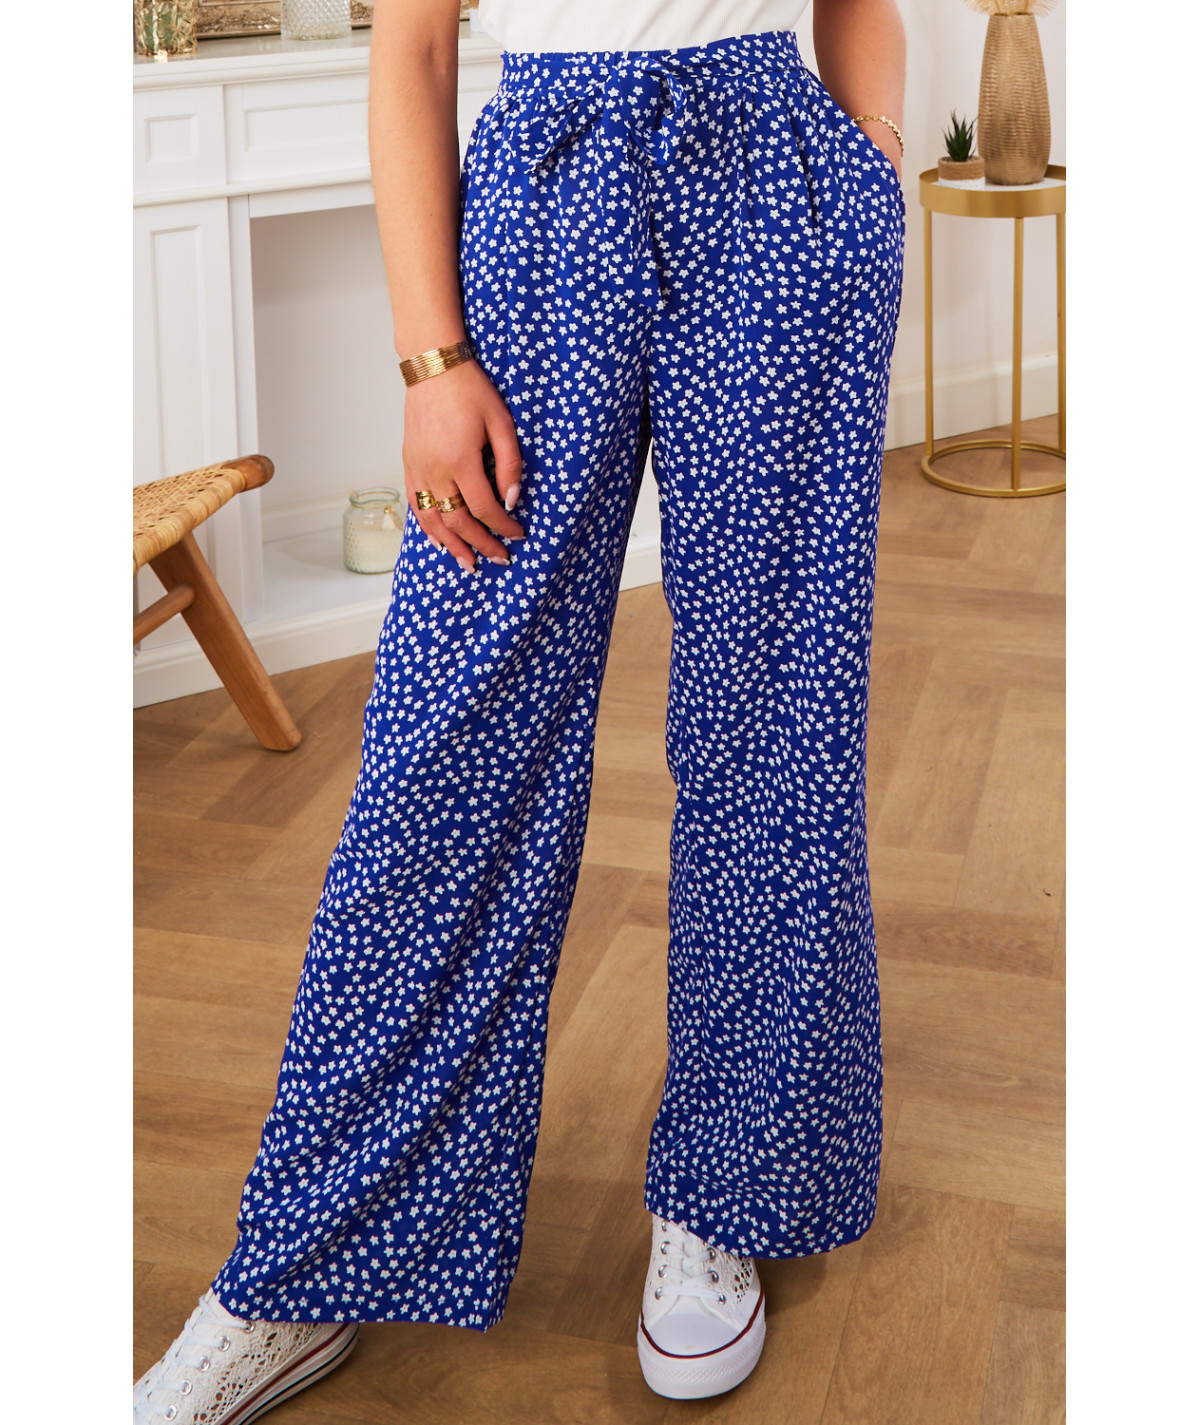 flowing trousers blue floral white belt